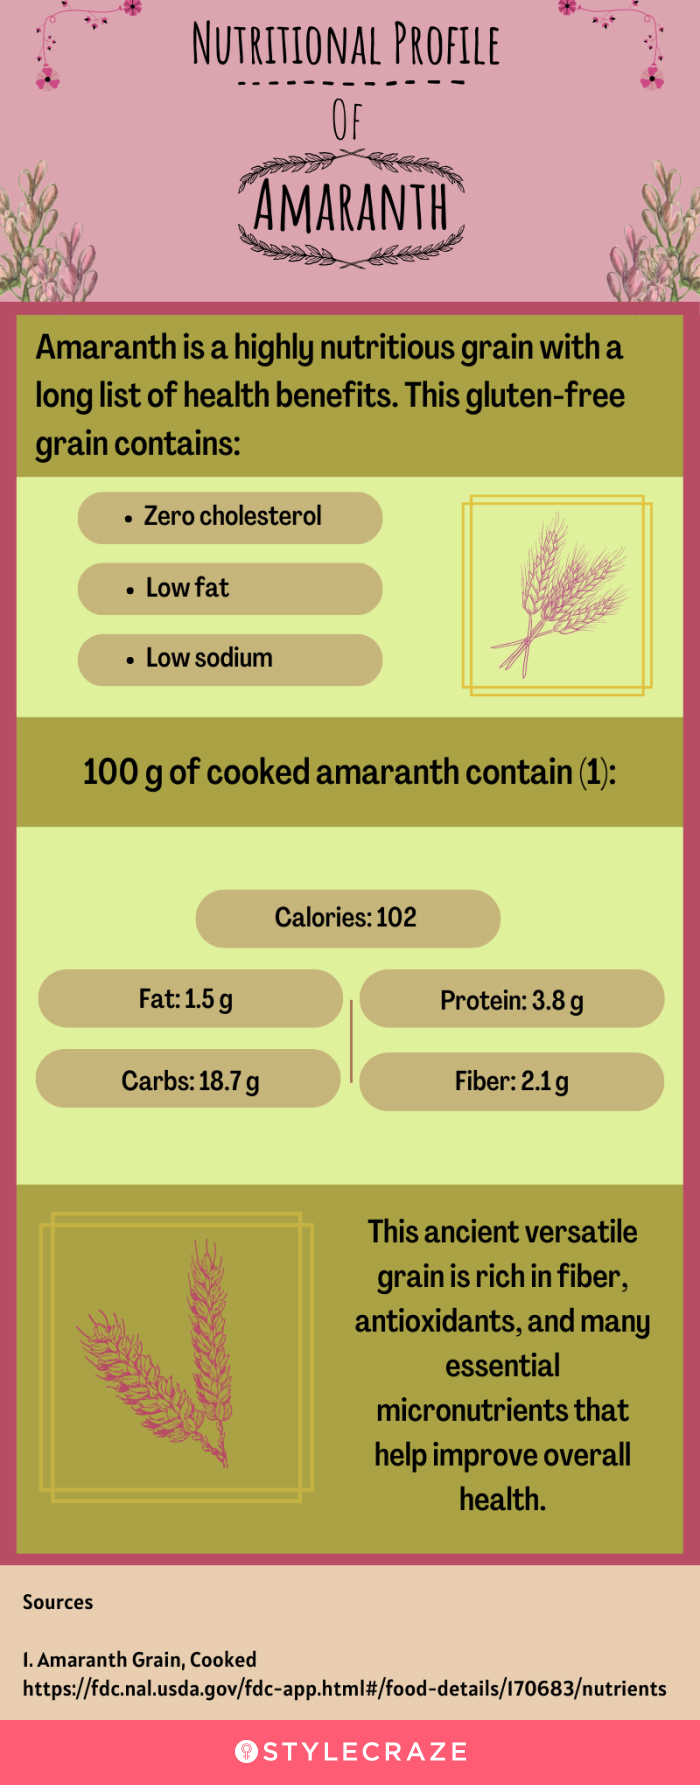 nutritional profile of amaranth (infographic)